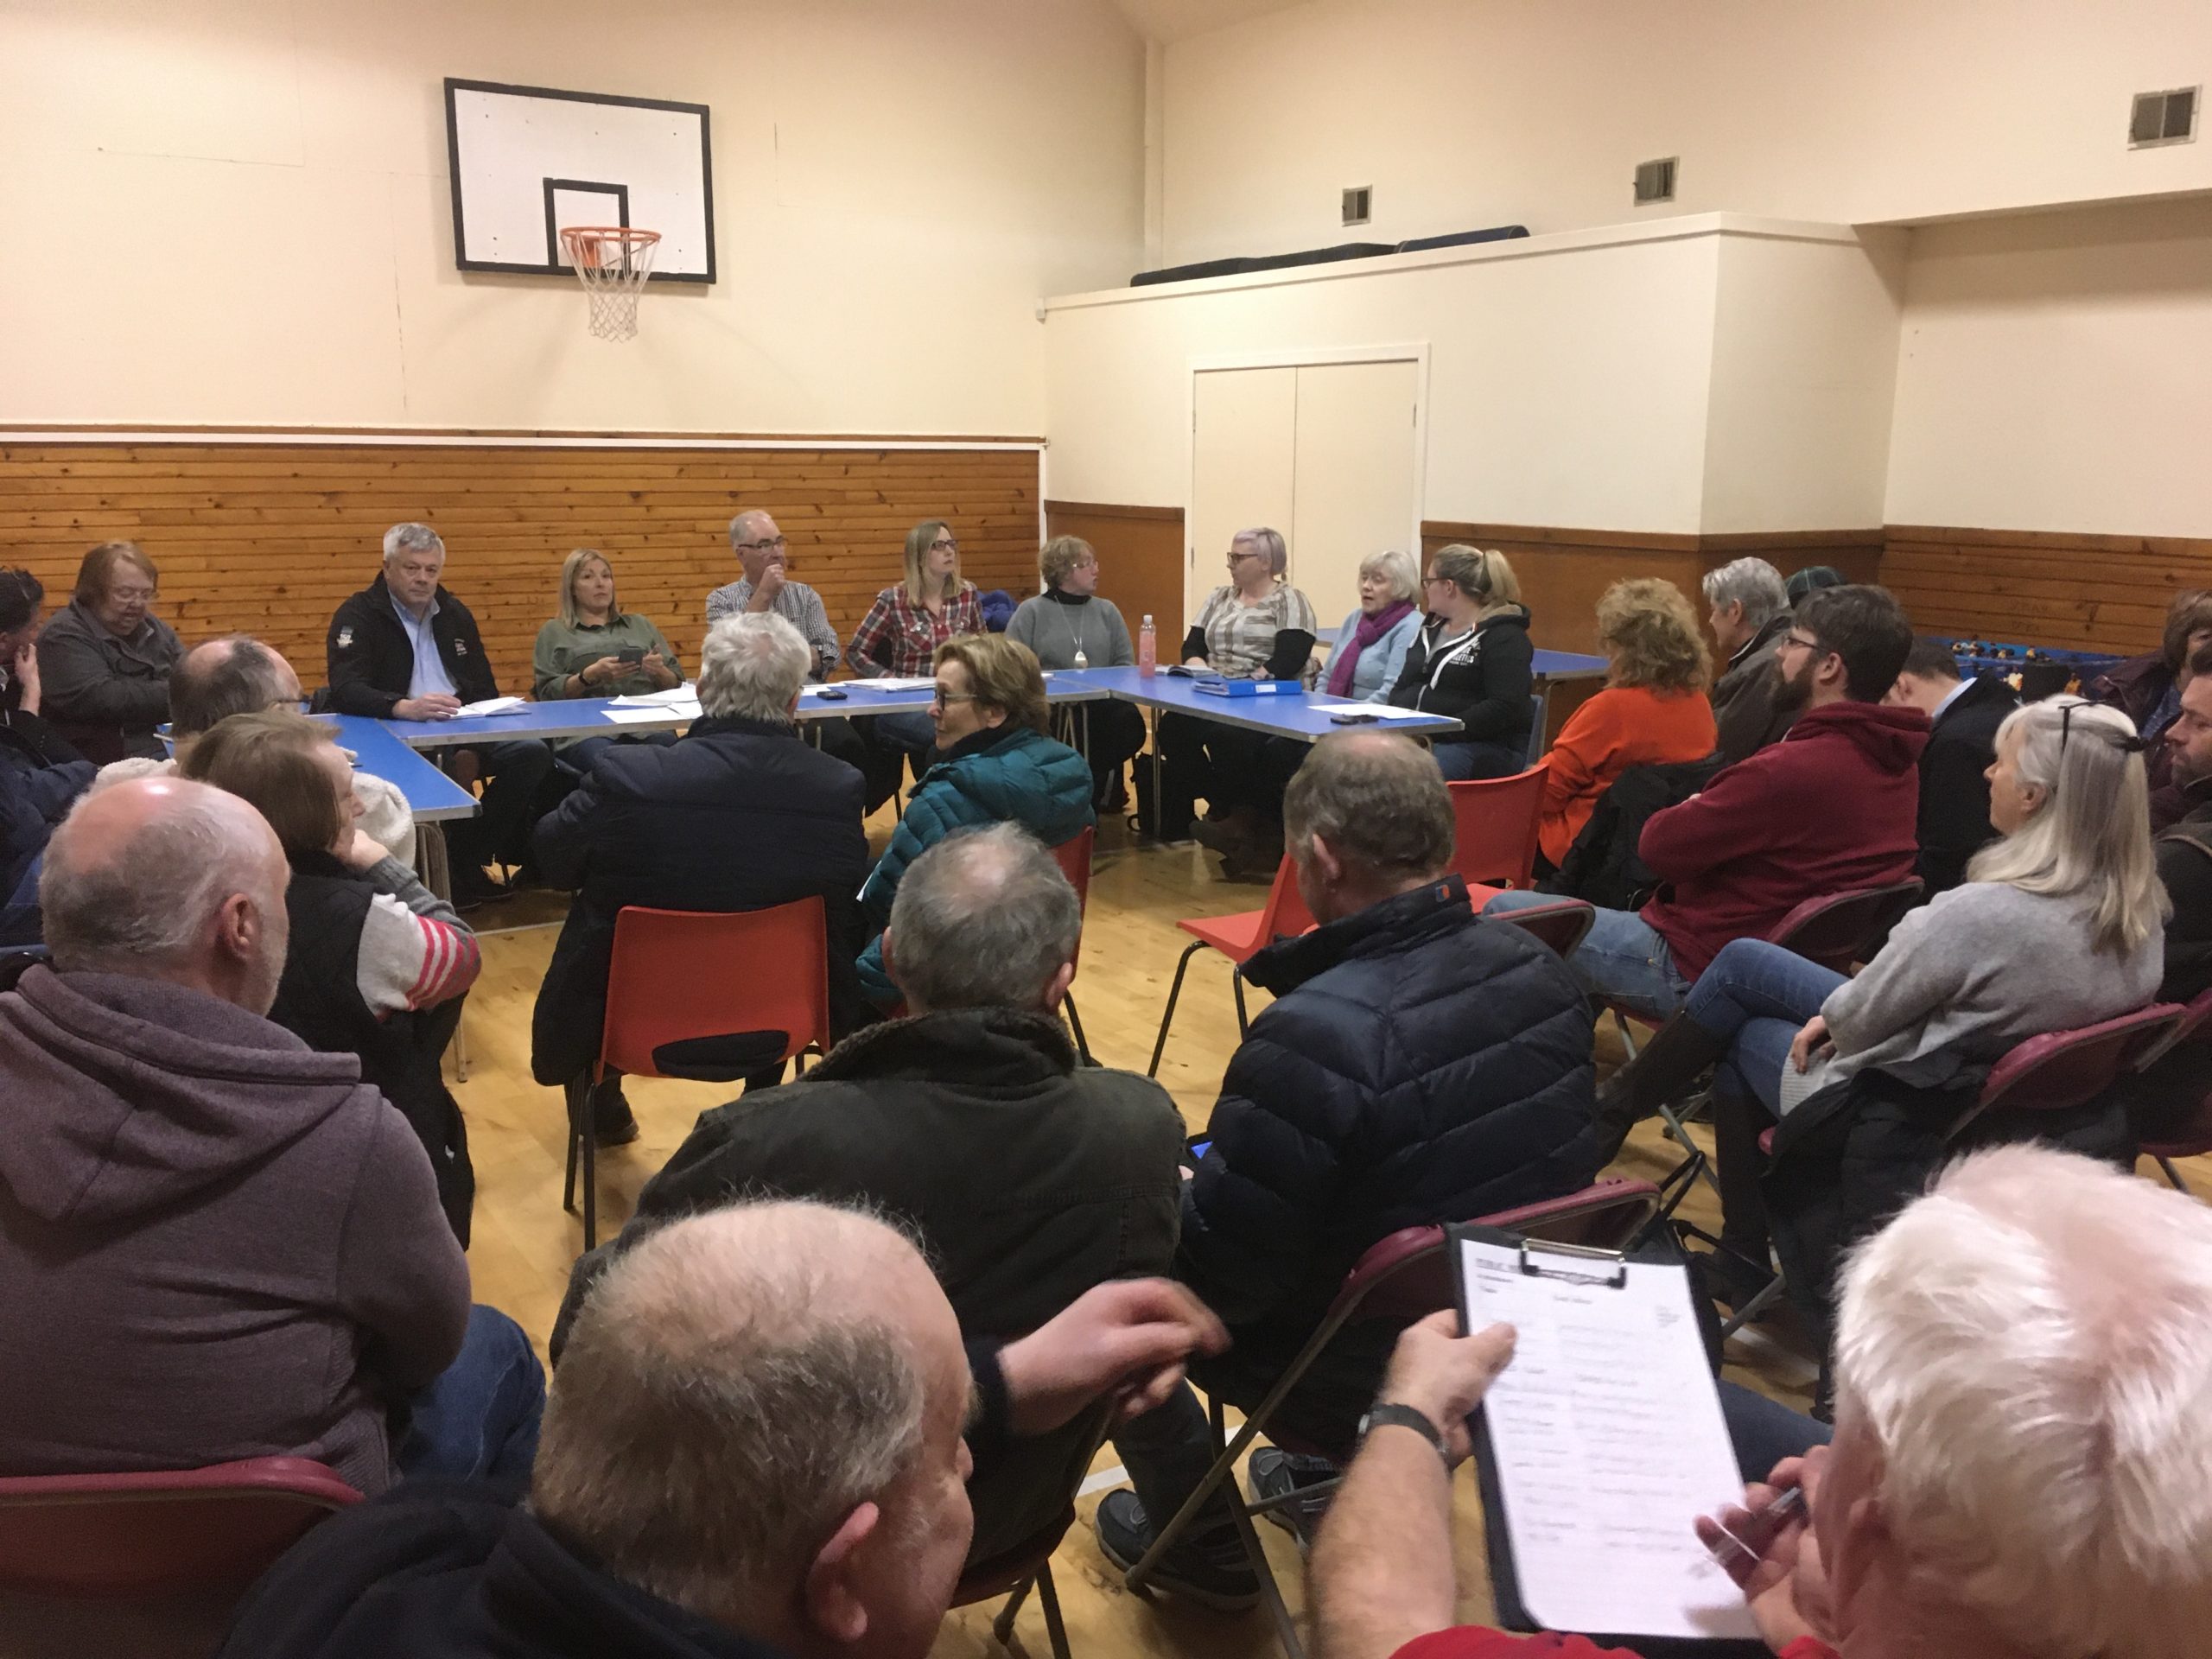 A public meeting was called to discuss the future of the historic Anstruther lifeboat station.